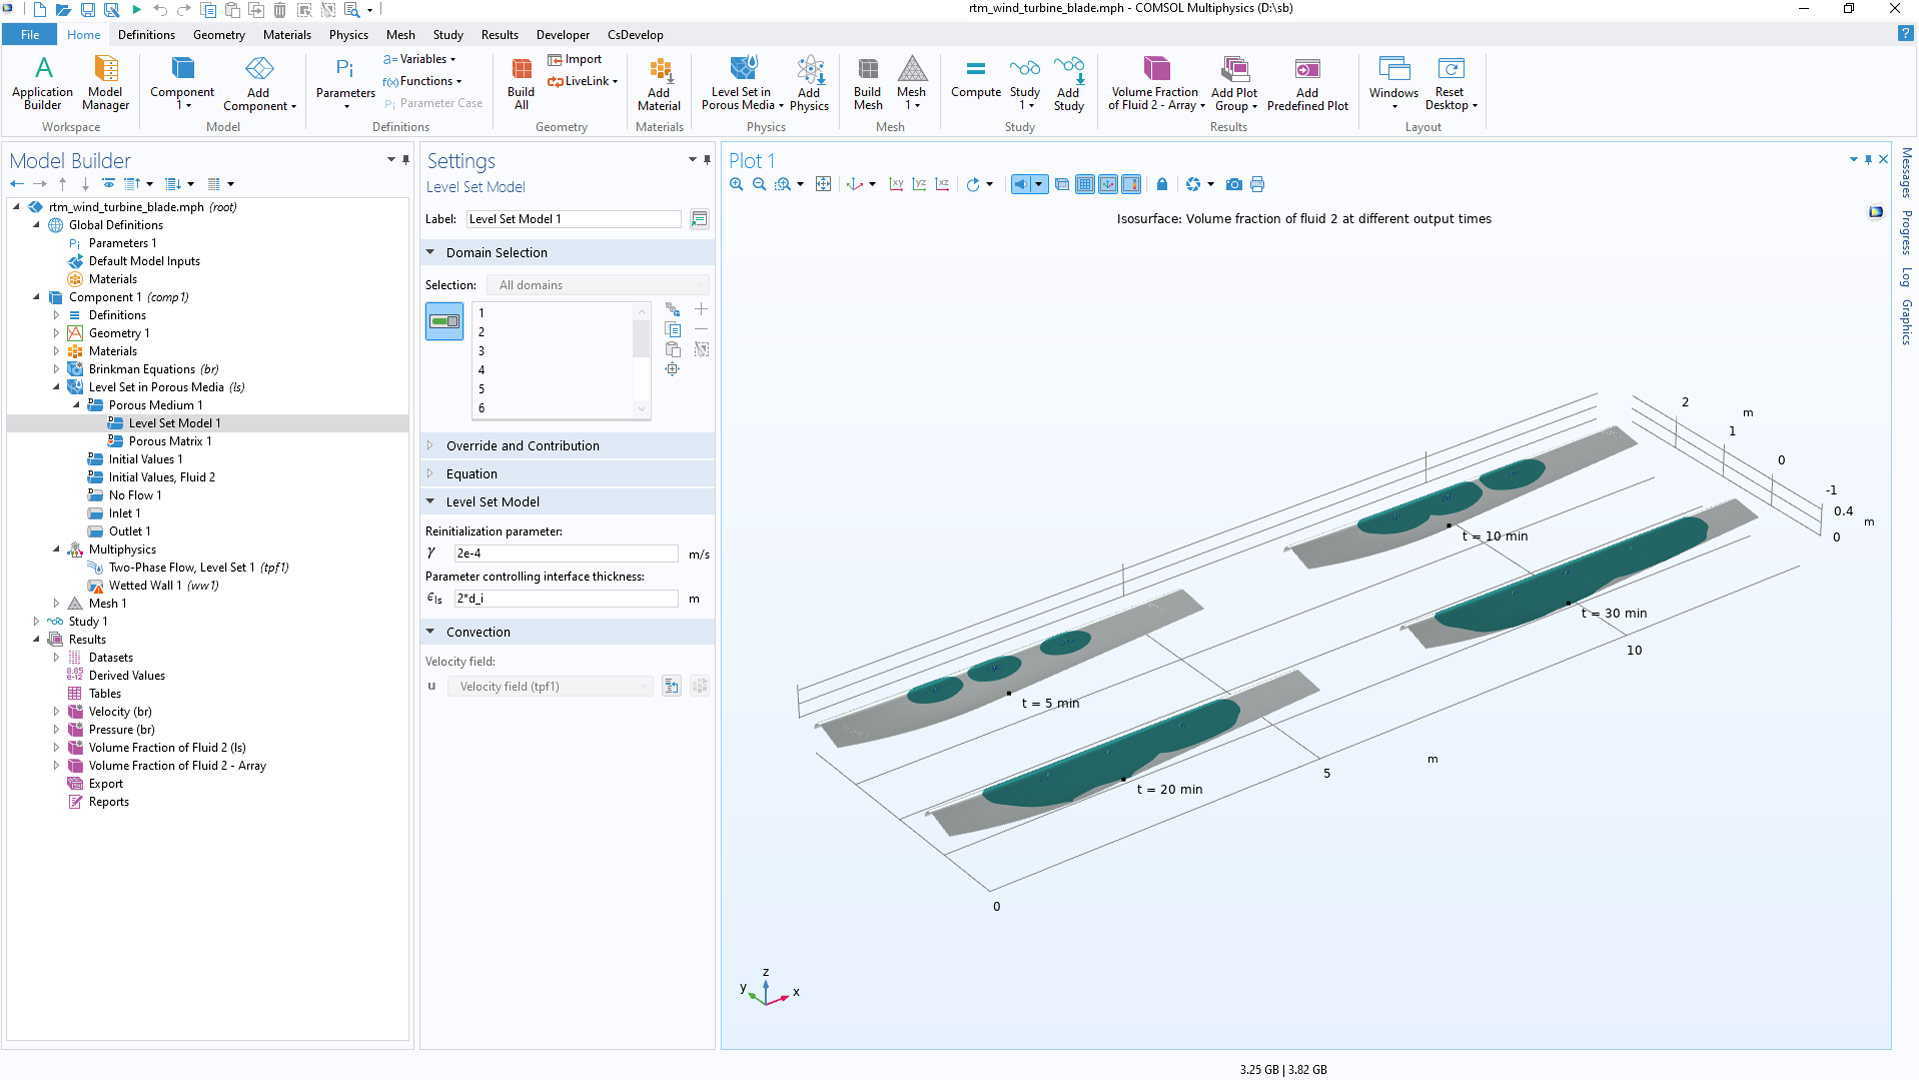 The COMSOL Multiphysics UI showing the Model Builder with the Level Set Model node highlighted, the corresponding Settings window, and wind turbine blade models in the Graphics window.